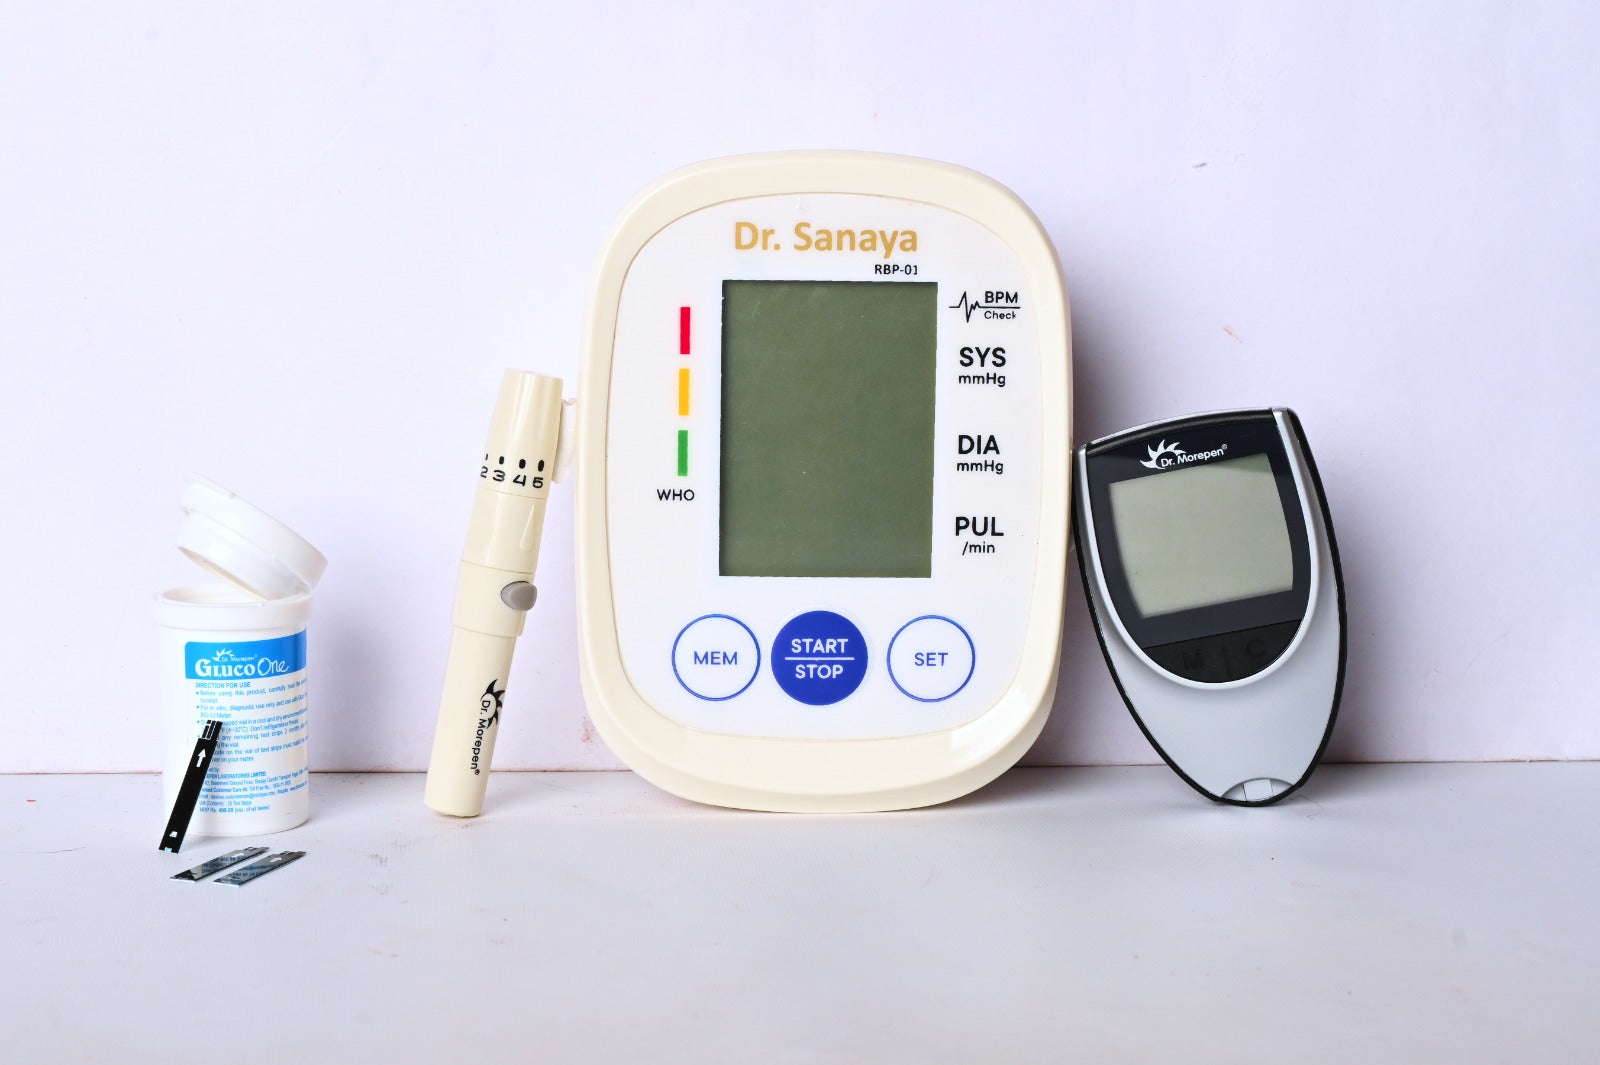 Dr. Sanaya Digital Blood Pressure Monitor RBP01 with C-Type USB Port (Arm Circumference 22-36Cm) and Dr. Morepen BG03 Glucometer with 25 Strips